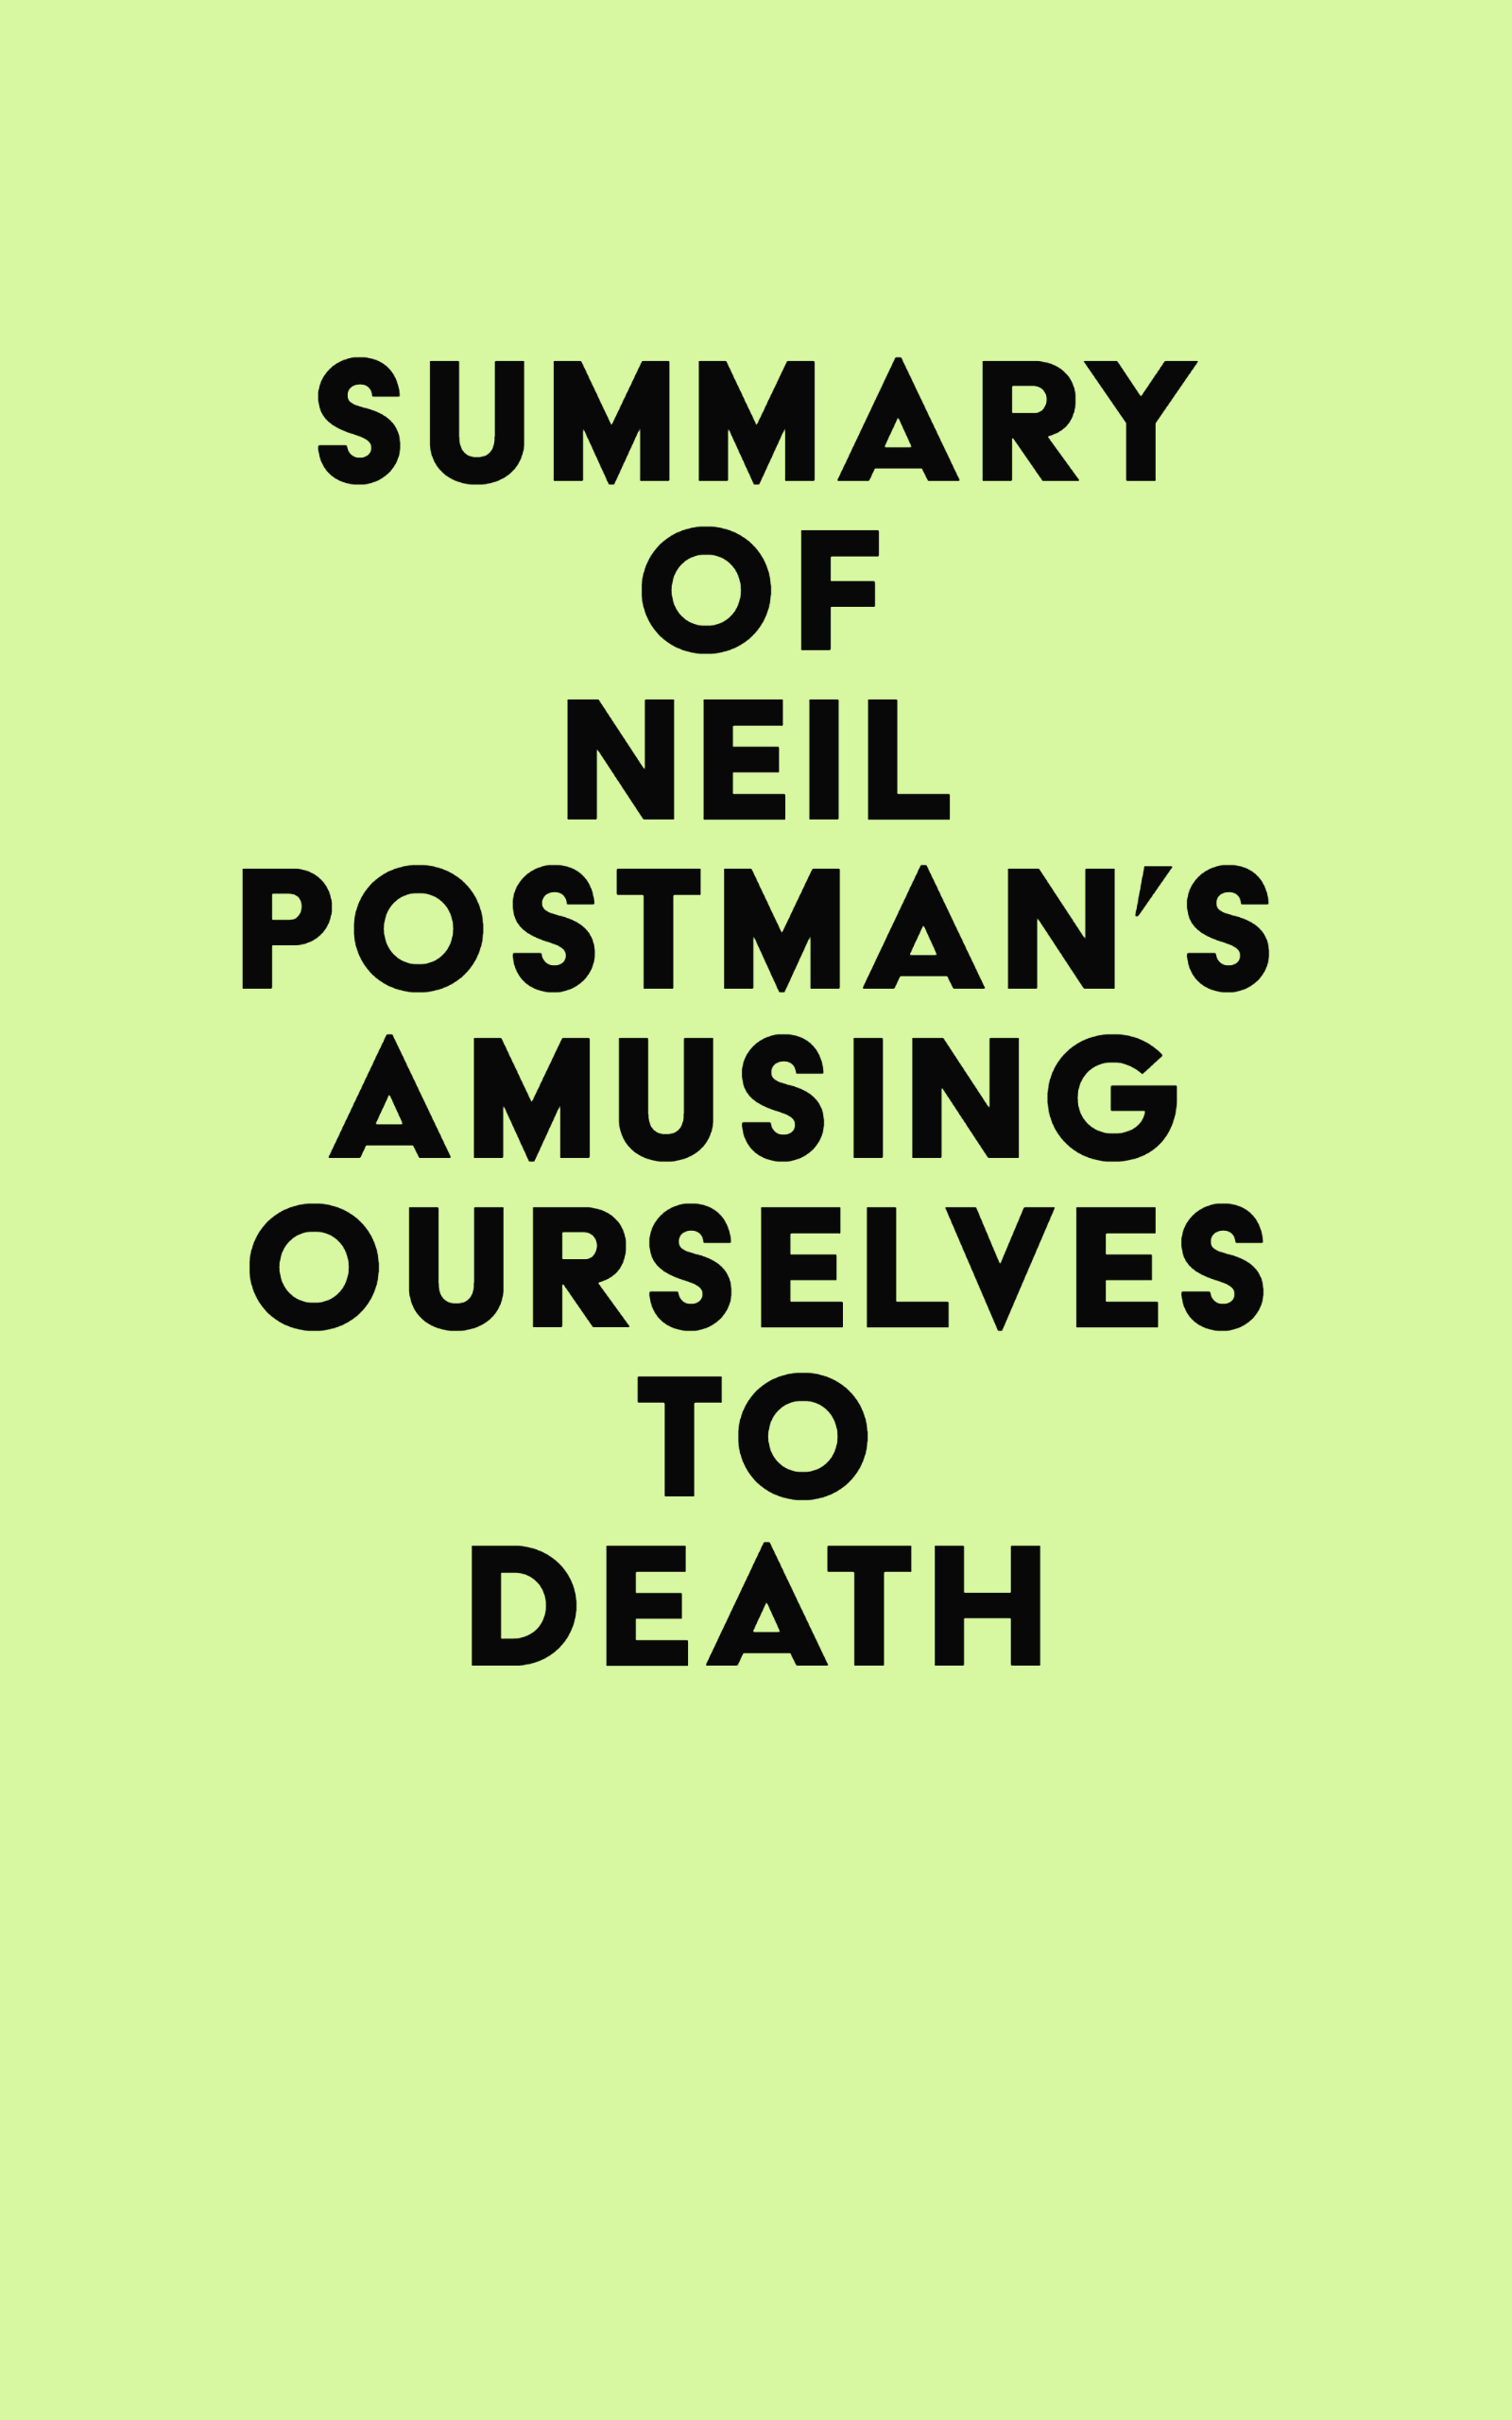 Summary of Neil Postman's Amusing Ourselves to Death